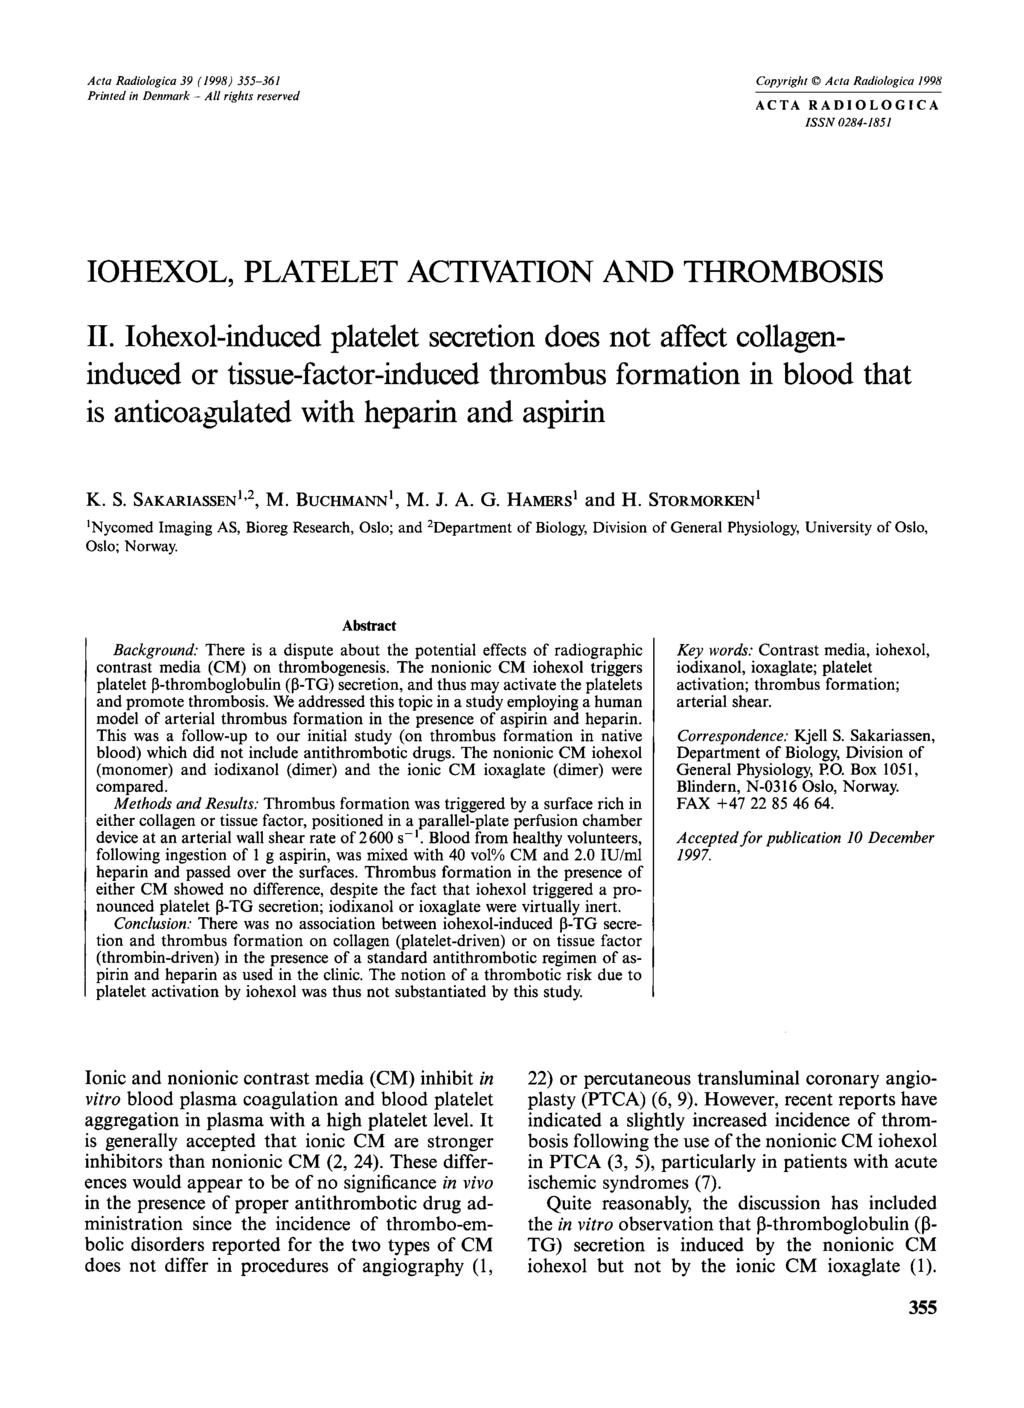 Acta Radiologica 39 (1998) 355-361 Prinred in Denmark - AN rights reserved Copyright 0 Acra Radiologicu 1998 AC TA R A D 1 0 L 0 G I CA ISSN 0284-1851 IOHEXOL, PLATELET ACTIVATION AND THROMBOSIS 11.